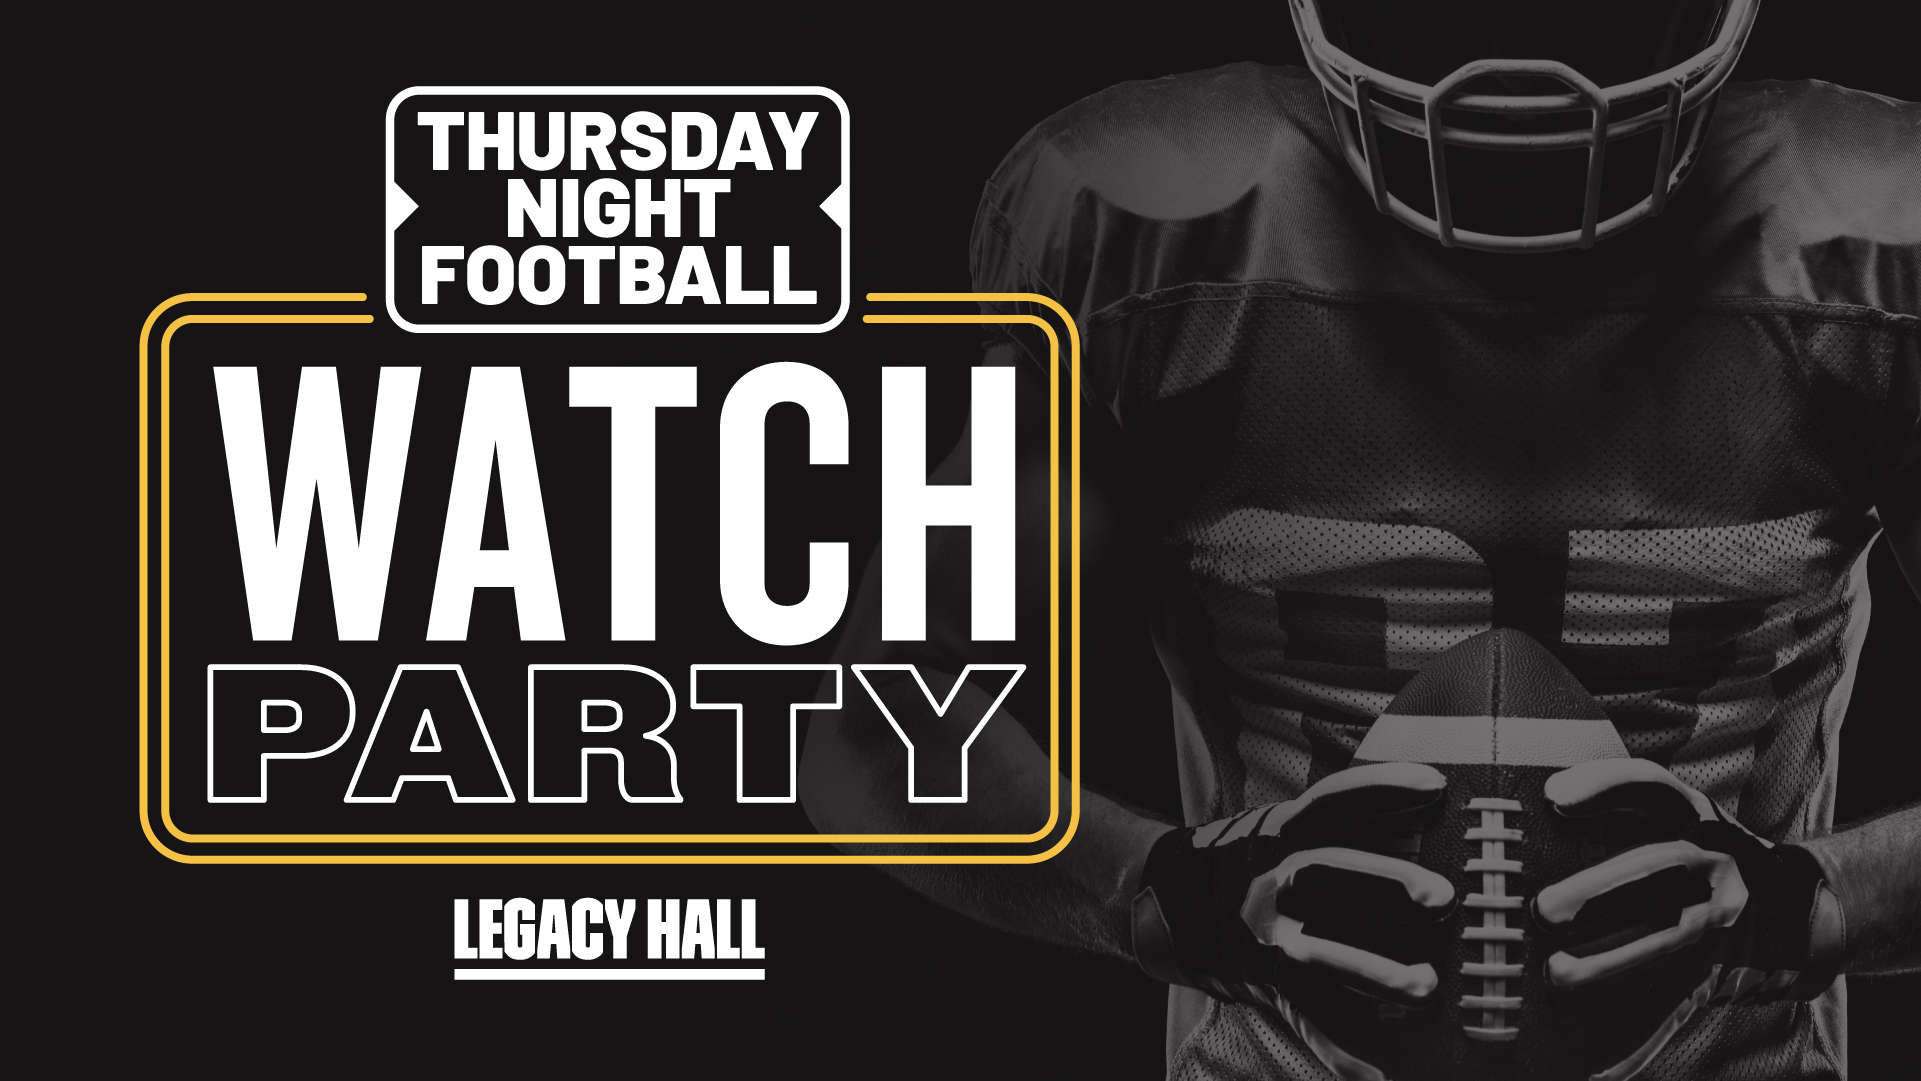 Thursday Night Football Watch Party New Orleans Saints vs Los Angeles Rams Legacy Hall